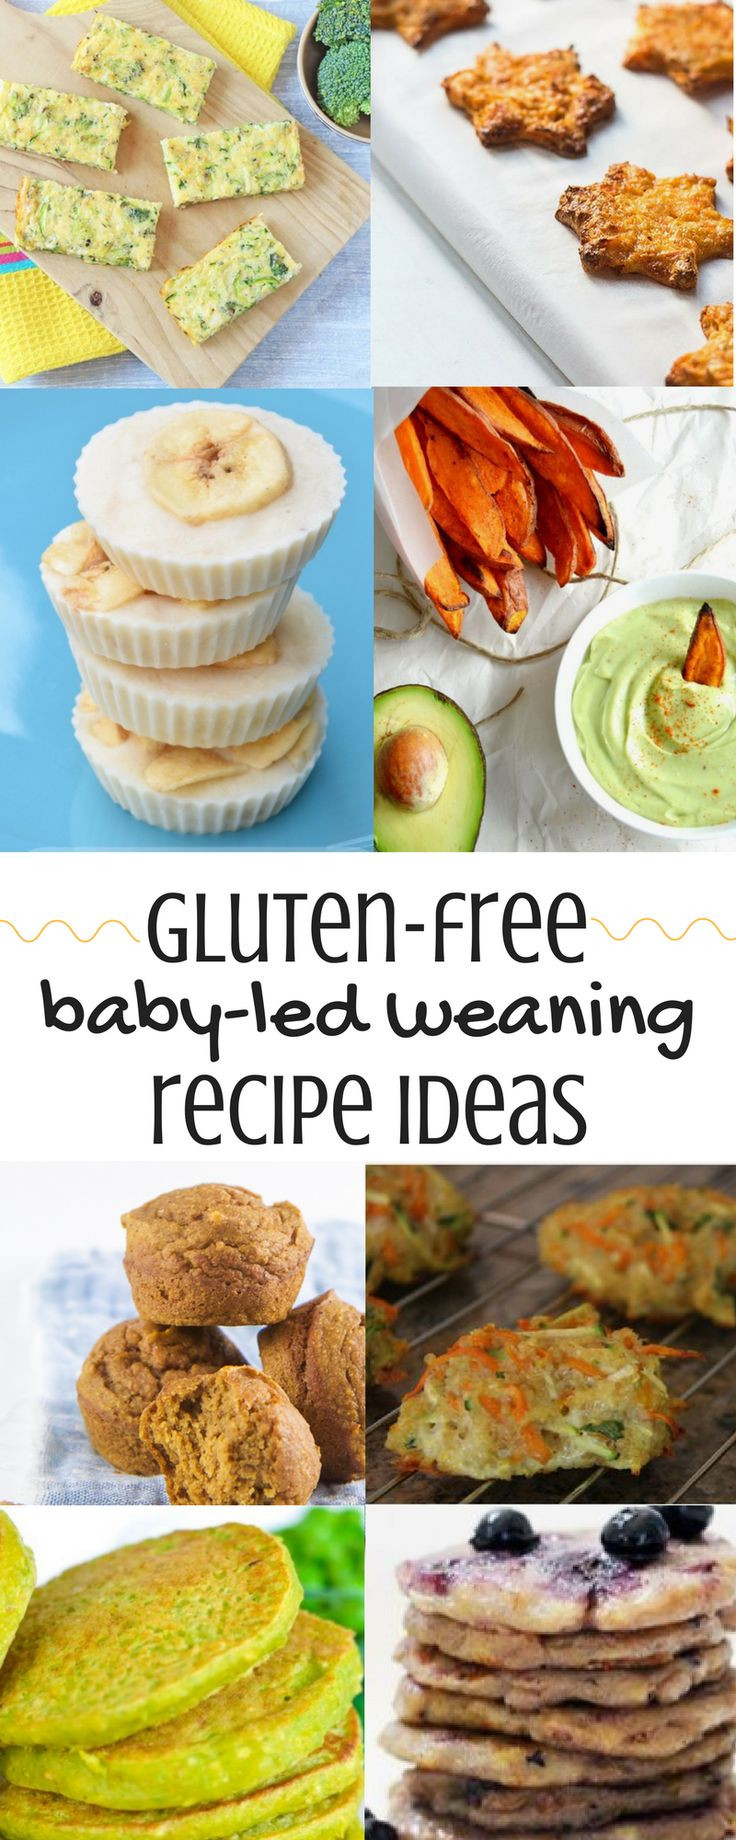 Dairy Free Recipes For Toddlers
 Best 25 Food for pregnancy ideas on Pinterest